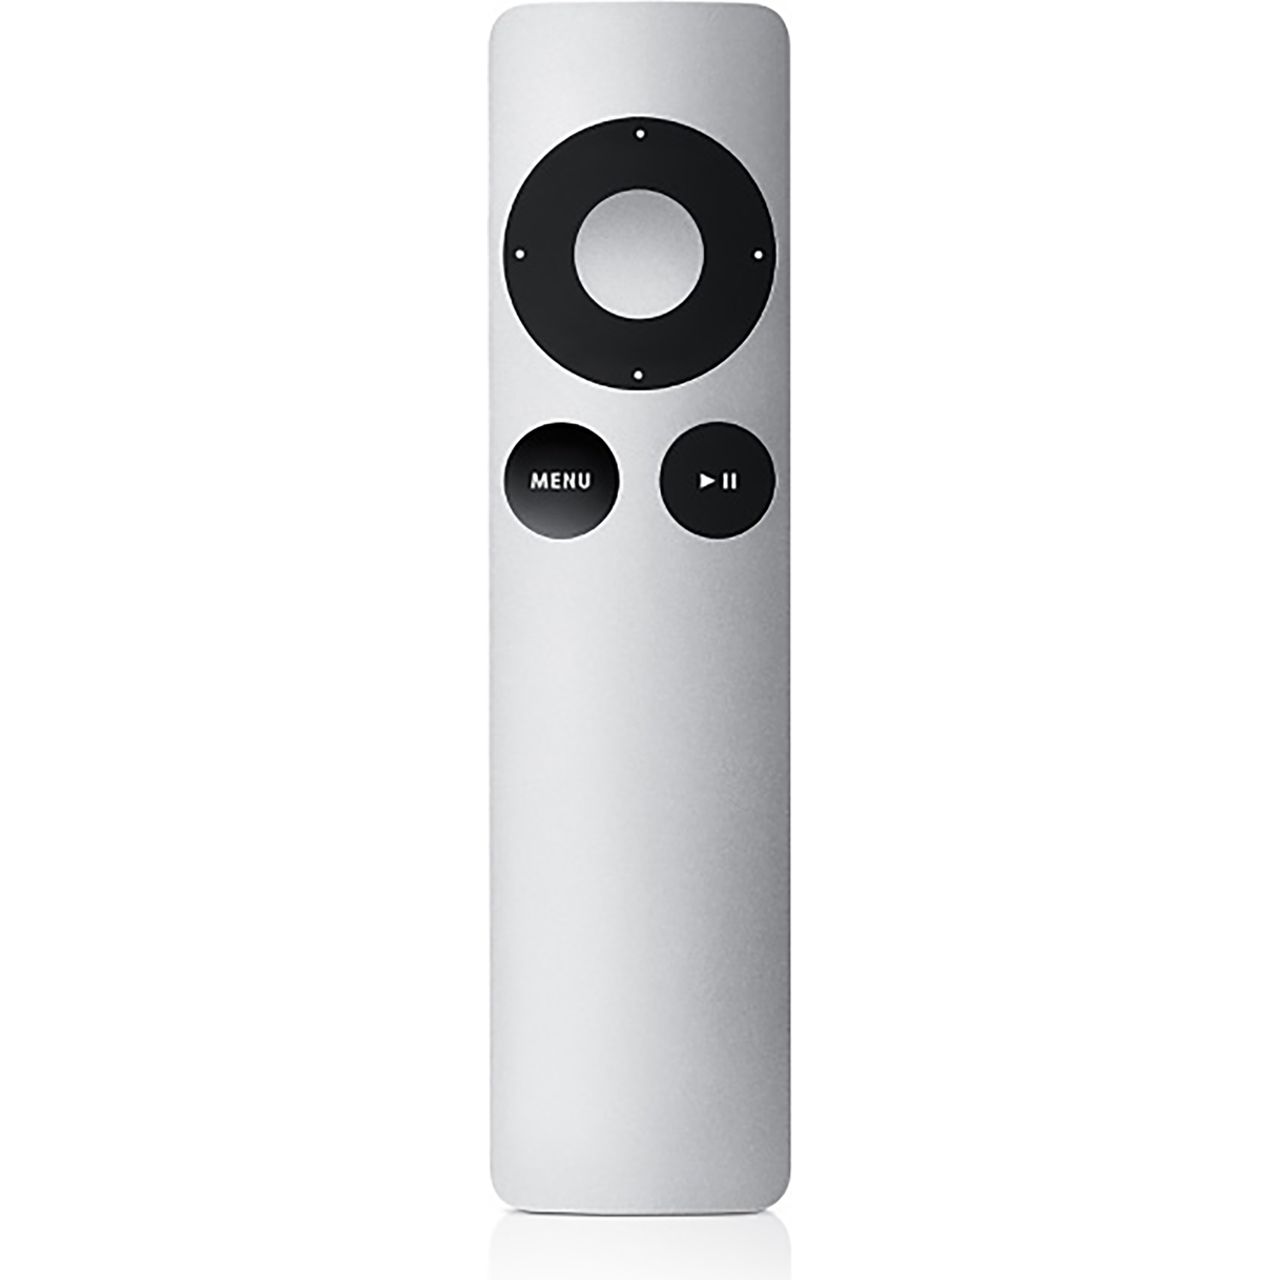 Apple Remote for Apple TV, iPod, iPhone and Mac Review